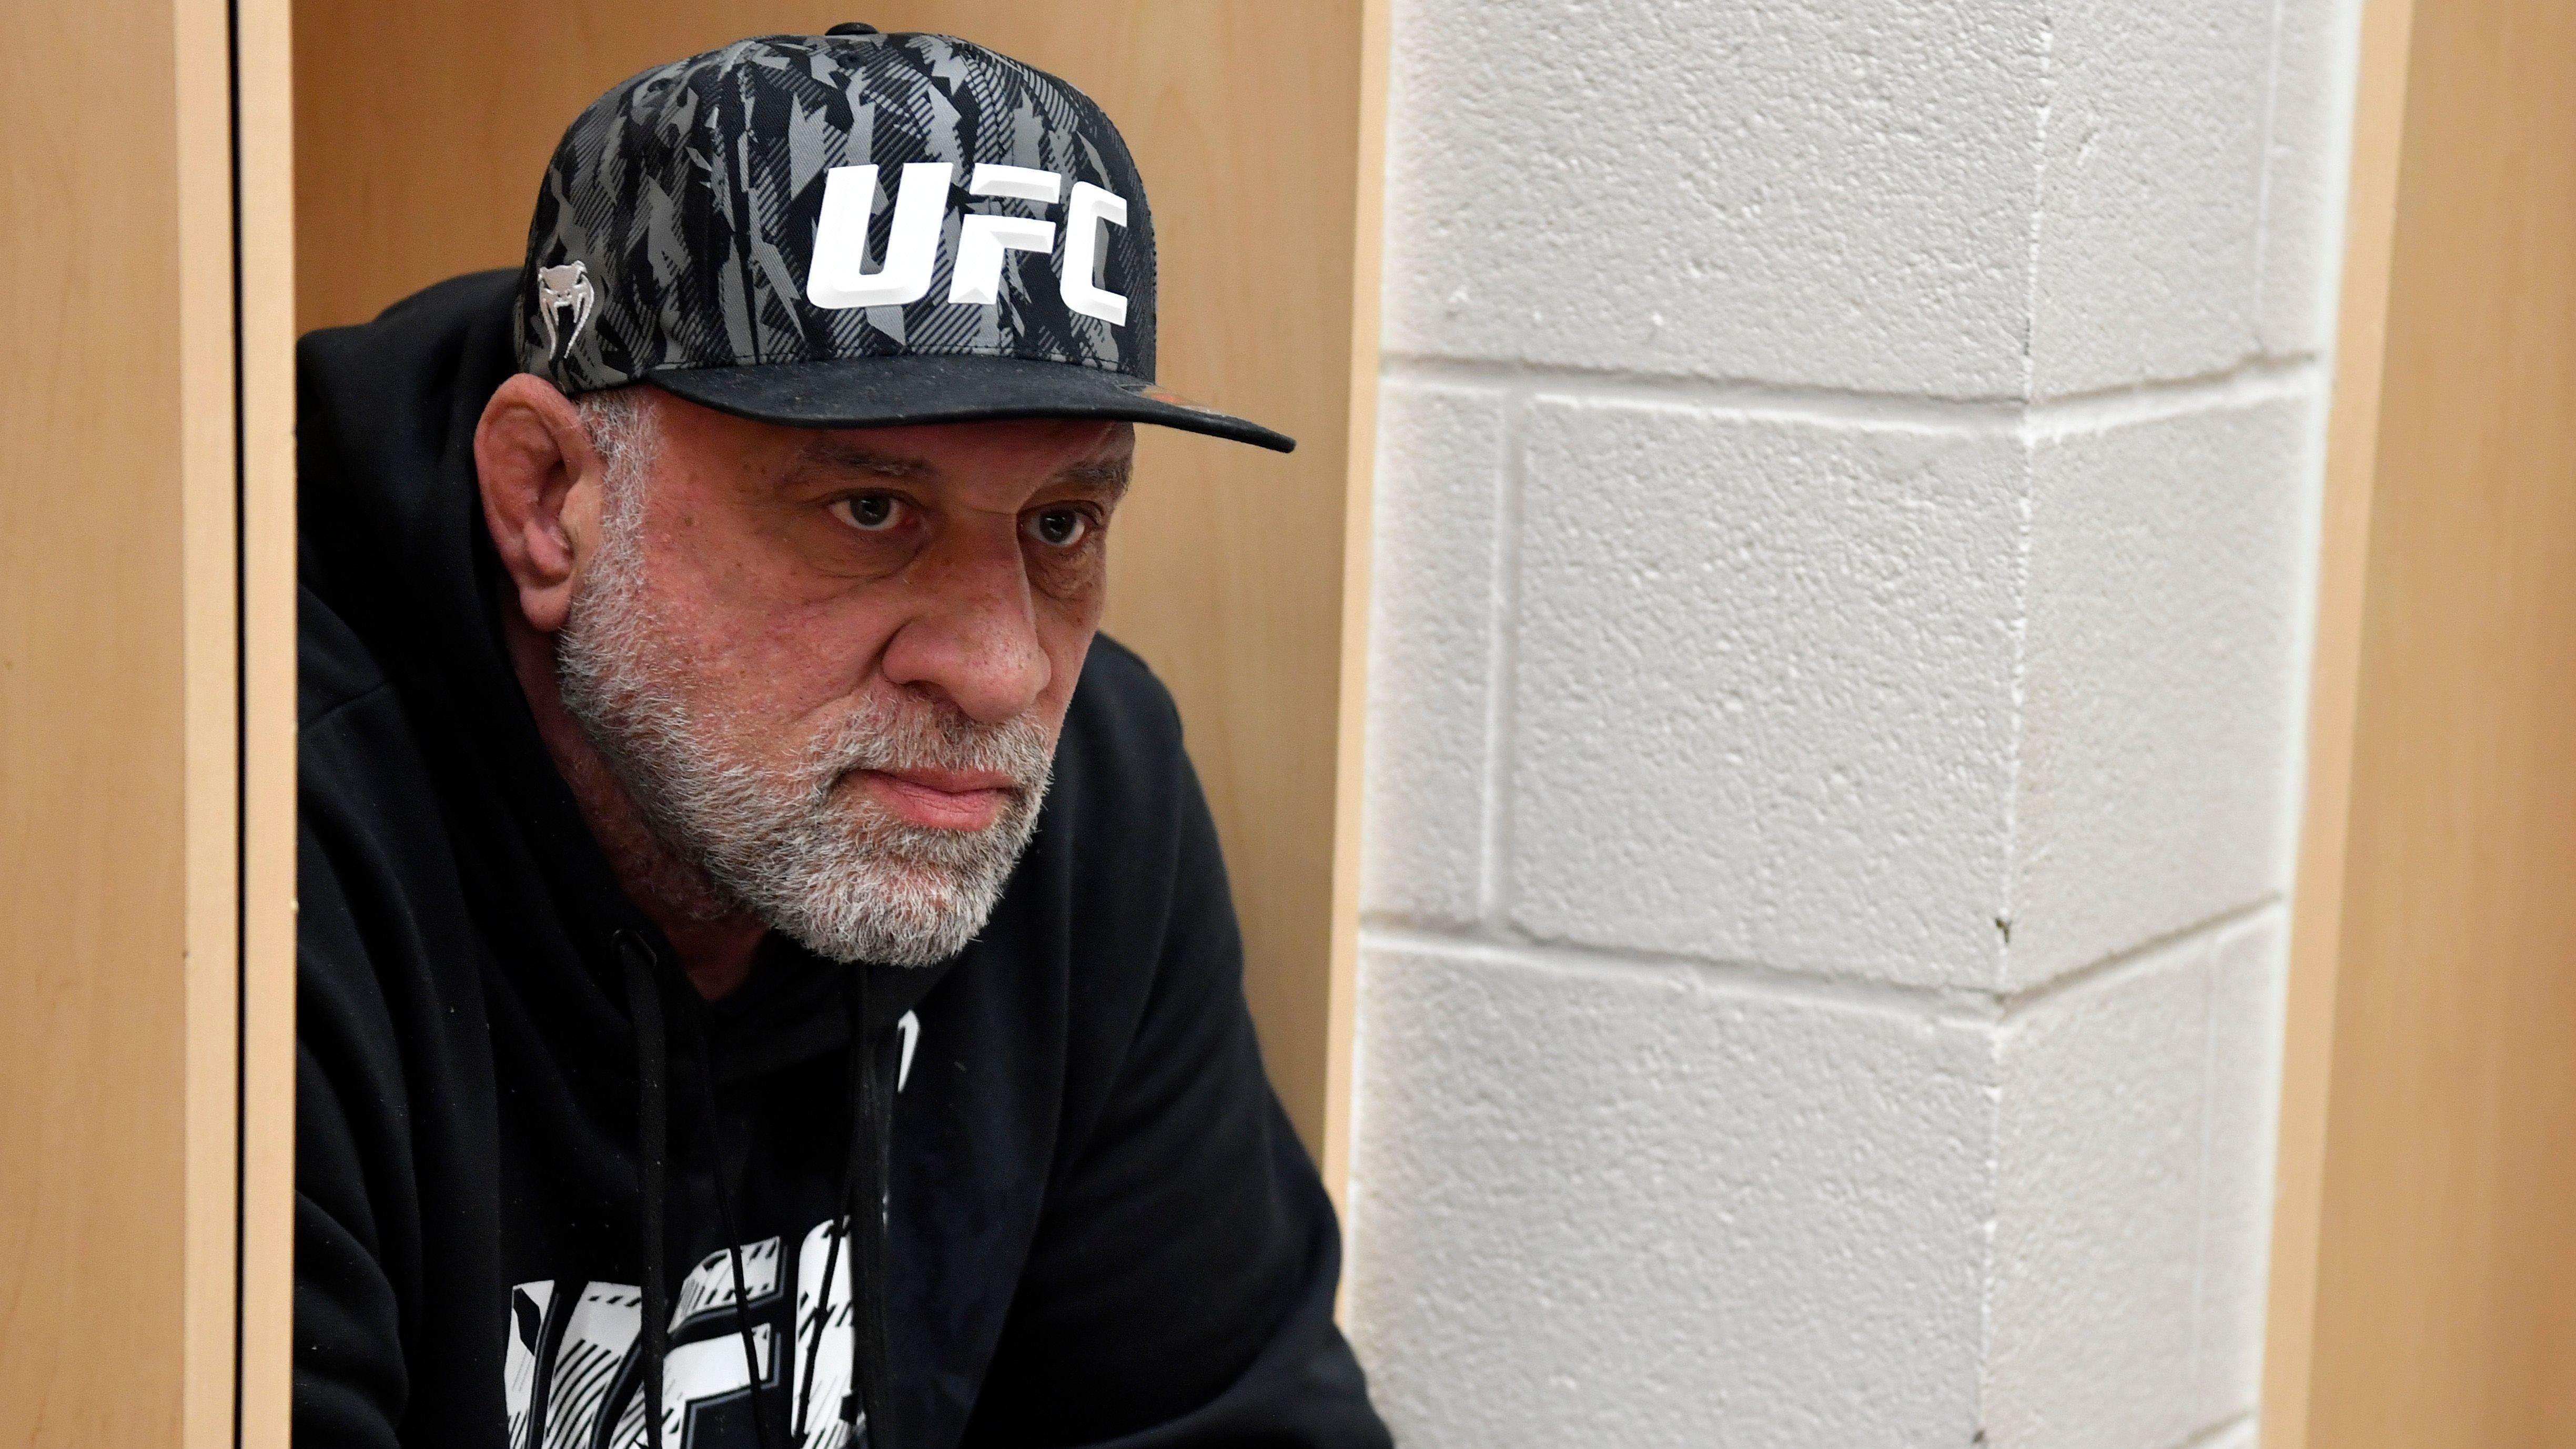 Mark Coleman wearing an UFC cap wth an angry expression